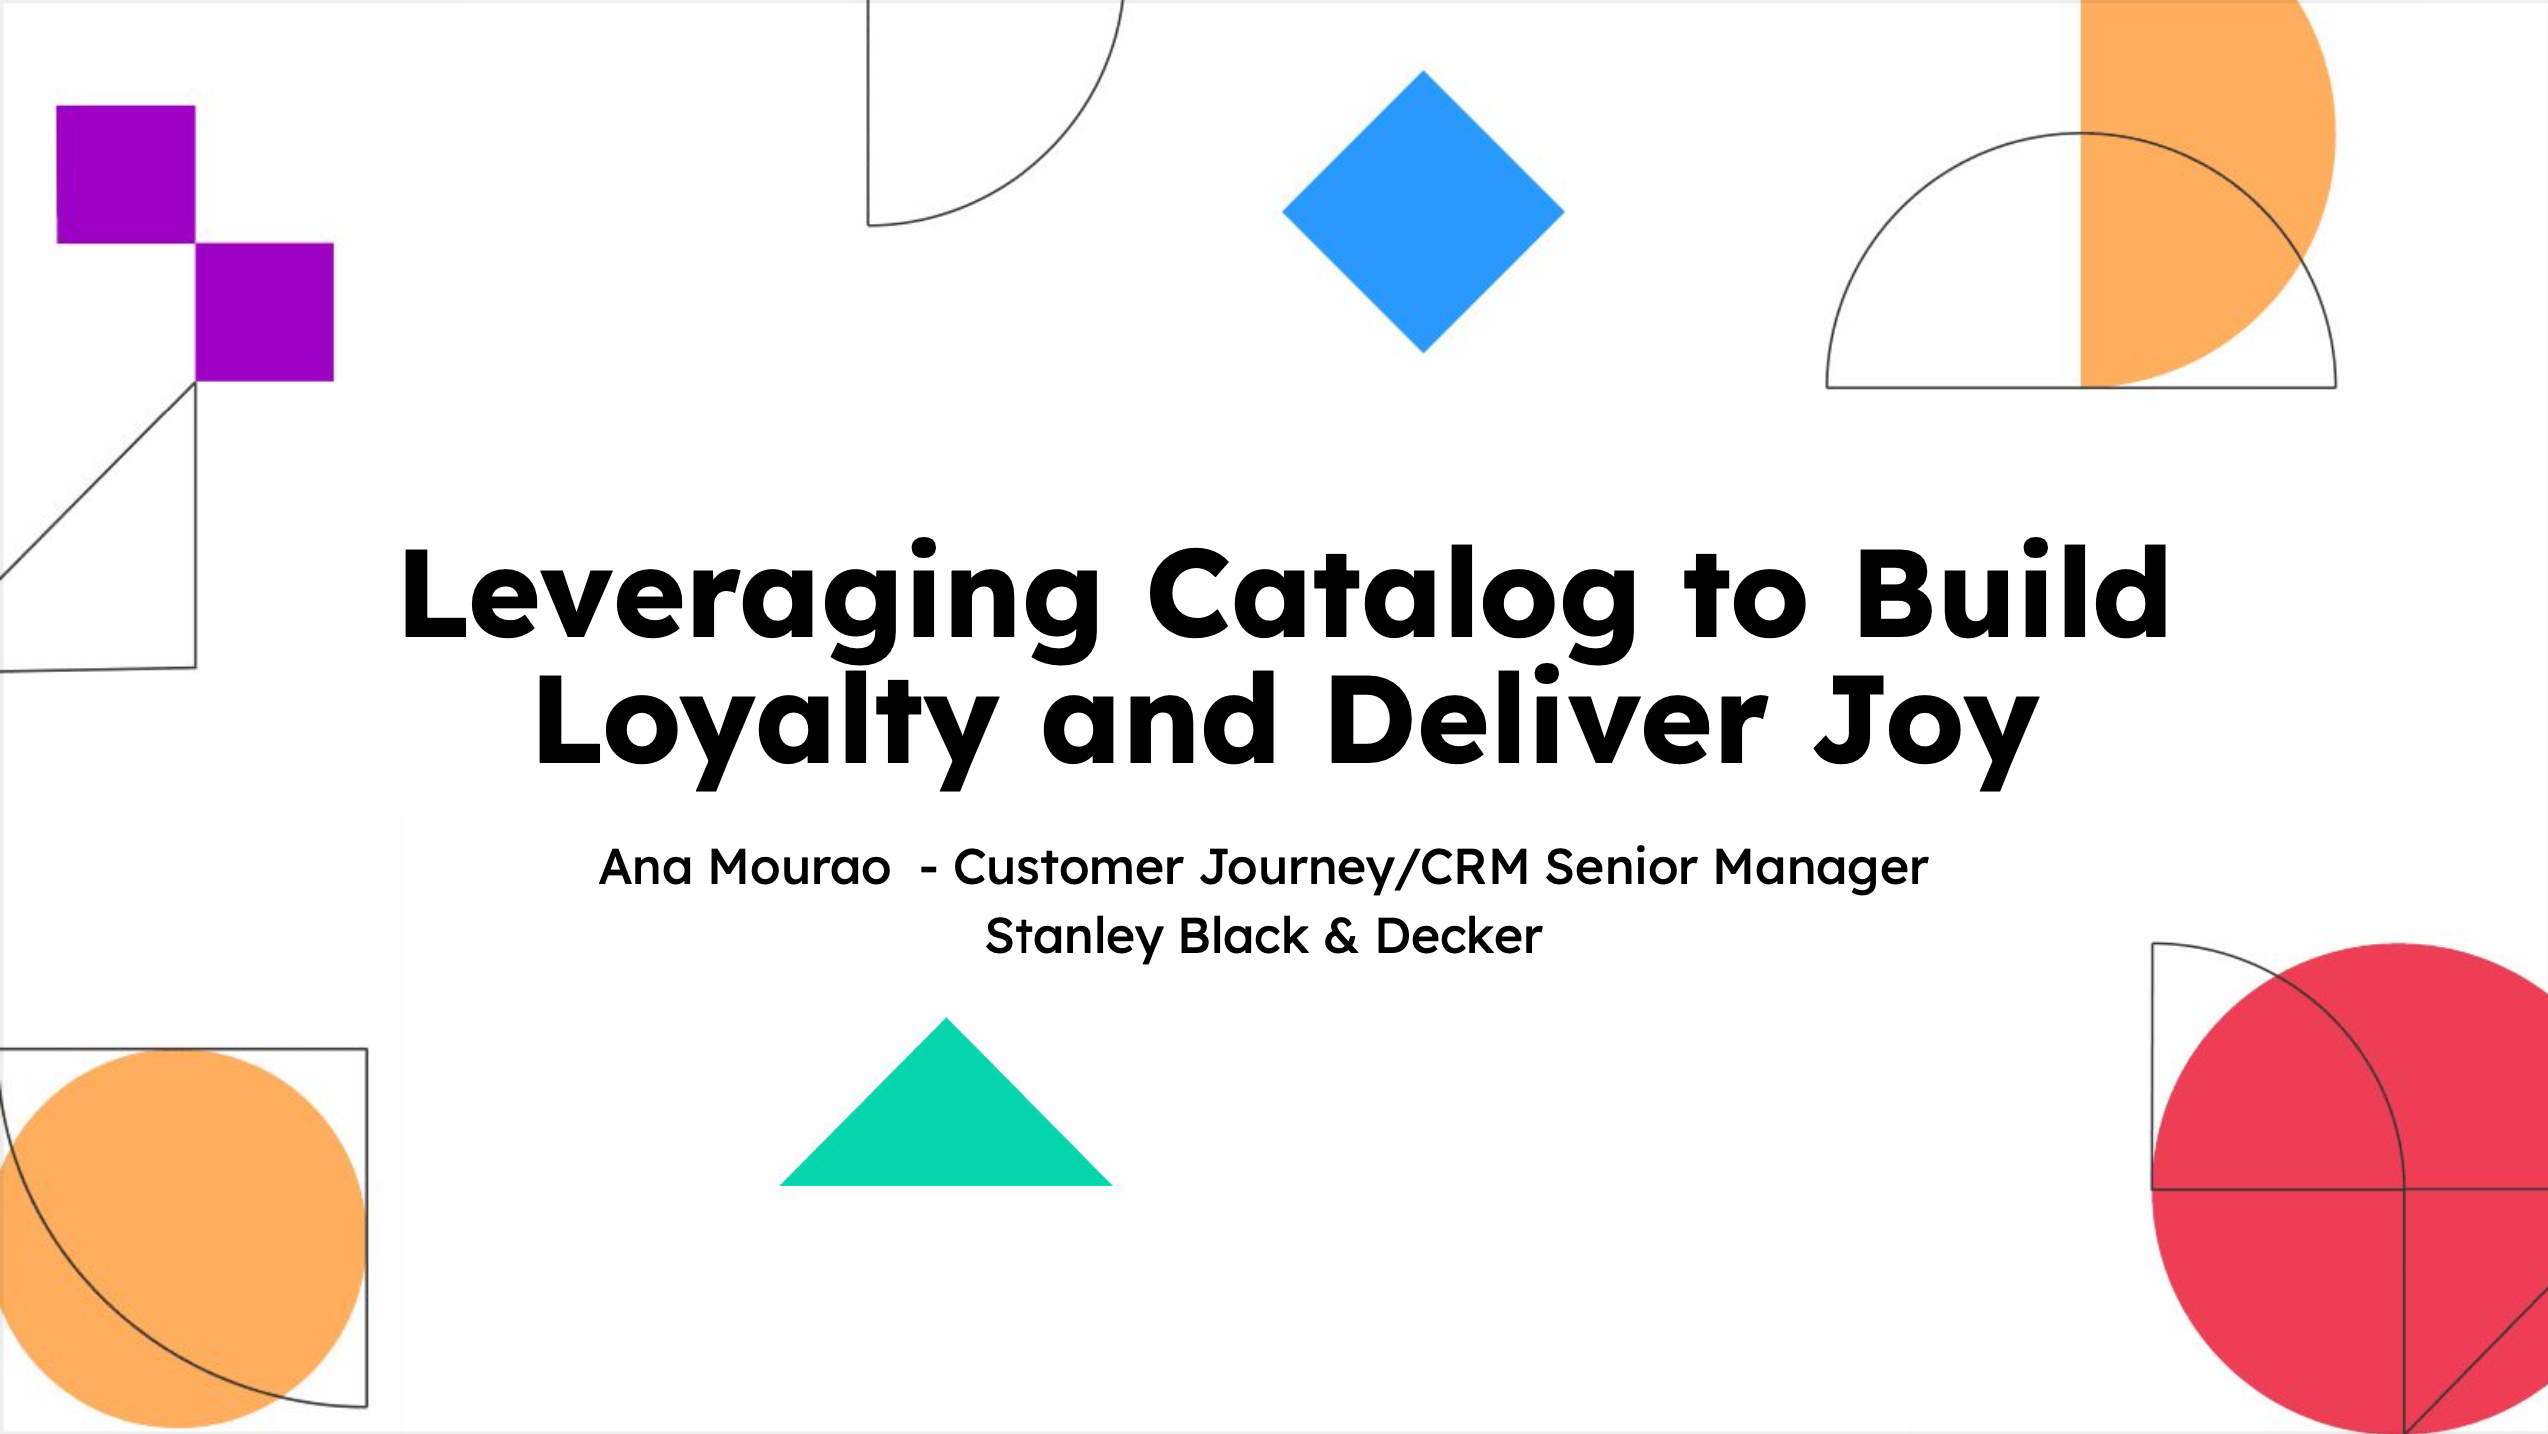 Leveraging Catalog to Build Loyalty and Deliver Joy